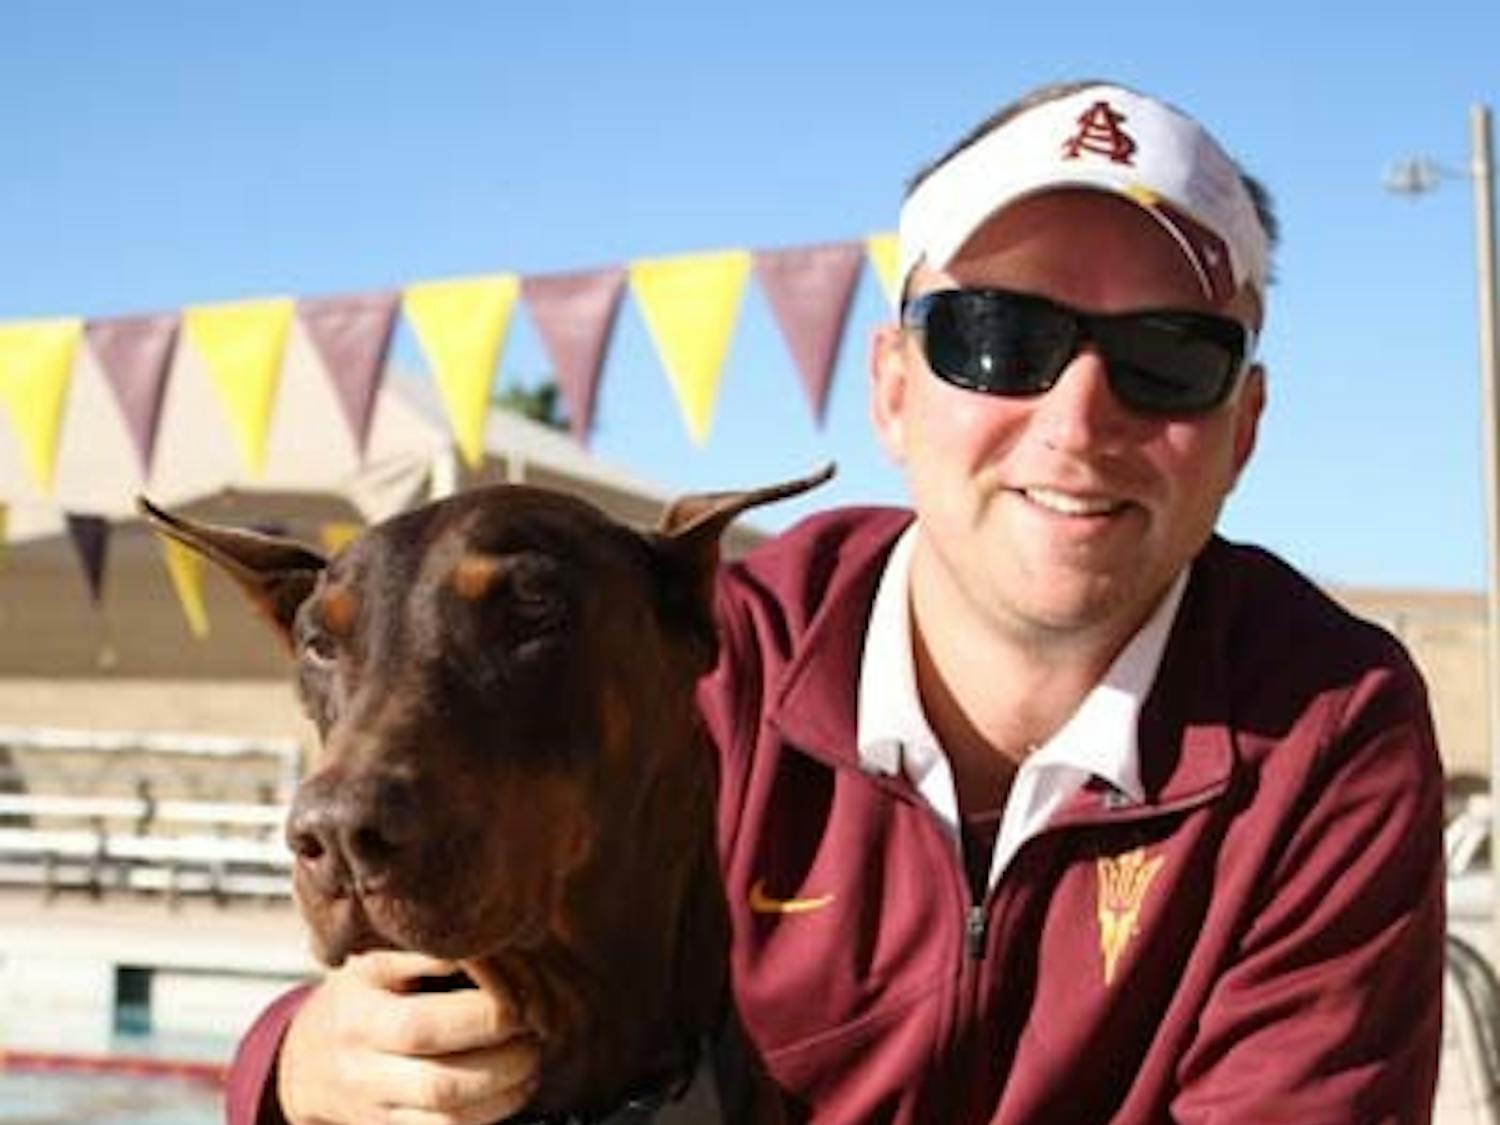 ASU swim coach Dan Kesler and his dog BA reunited after BA had been missing for seven years. (Photo by Jessie Wardarski)